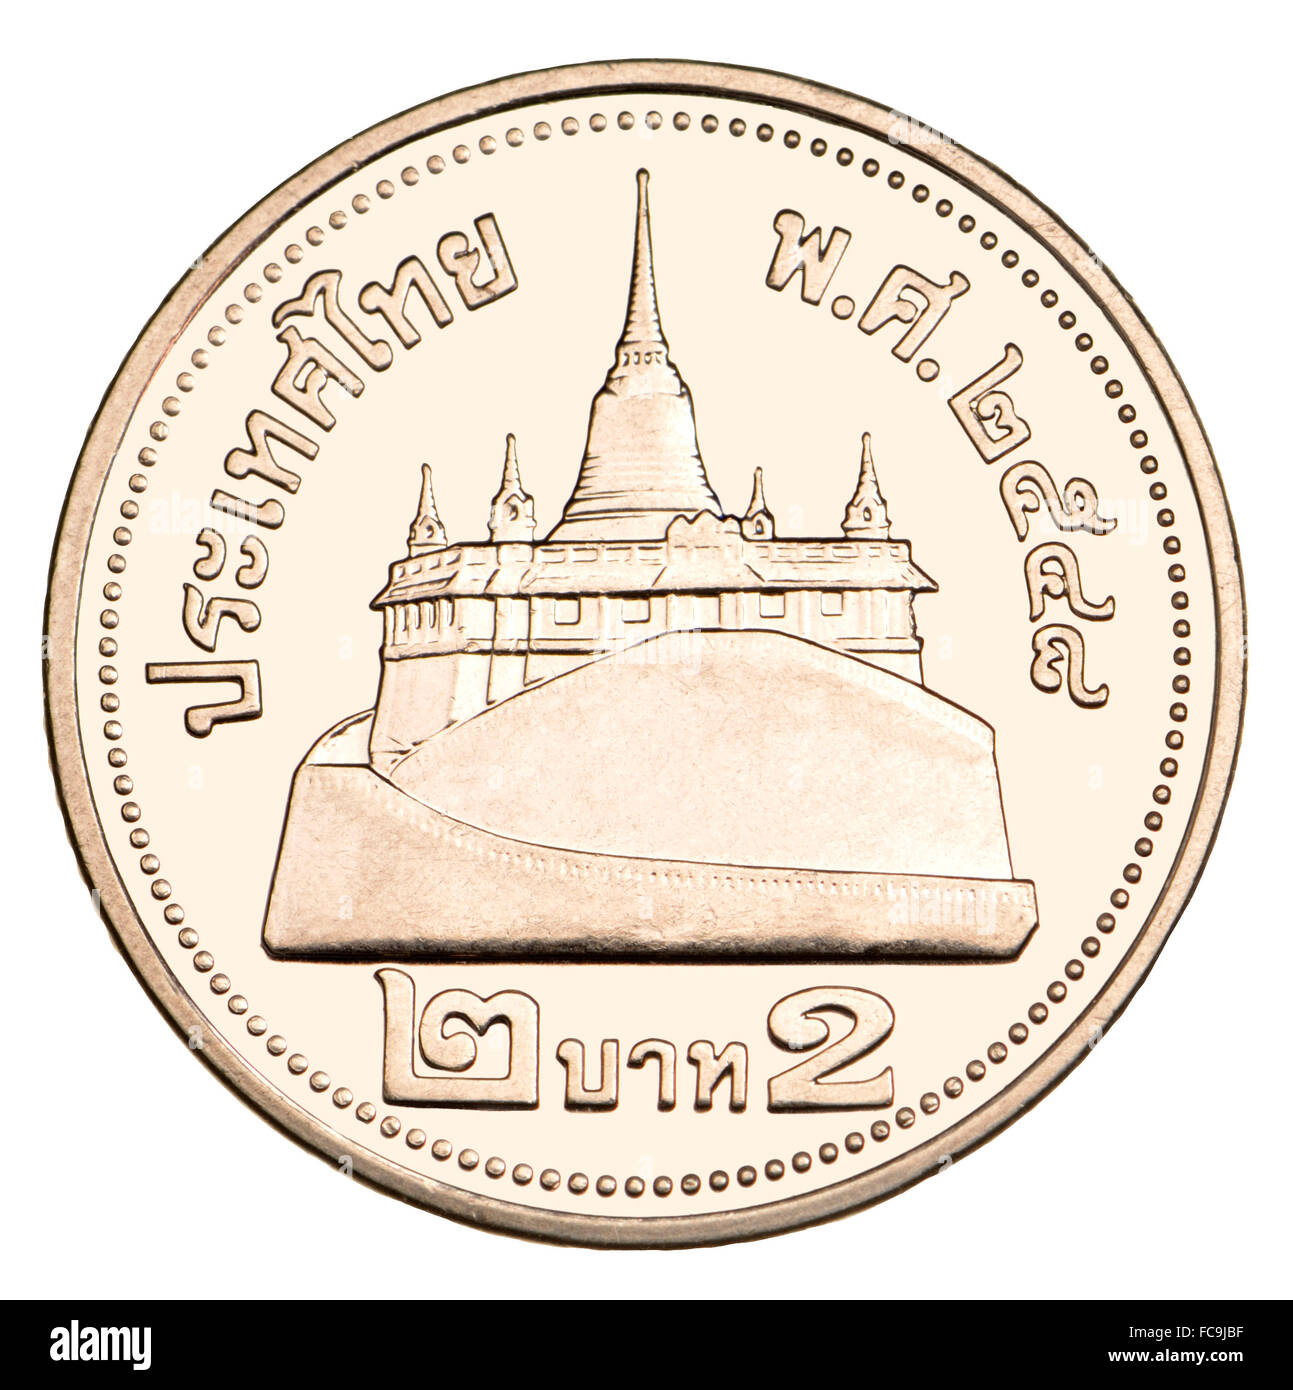 Thai 2 Baht coin showing the Golden Mount. Stock Photo